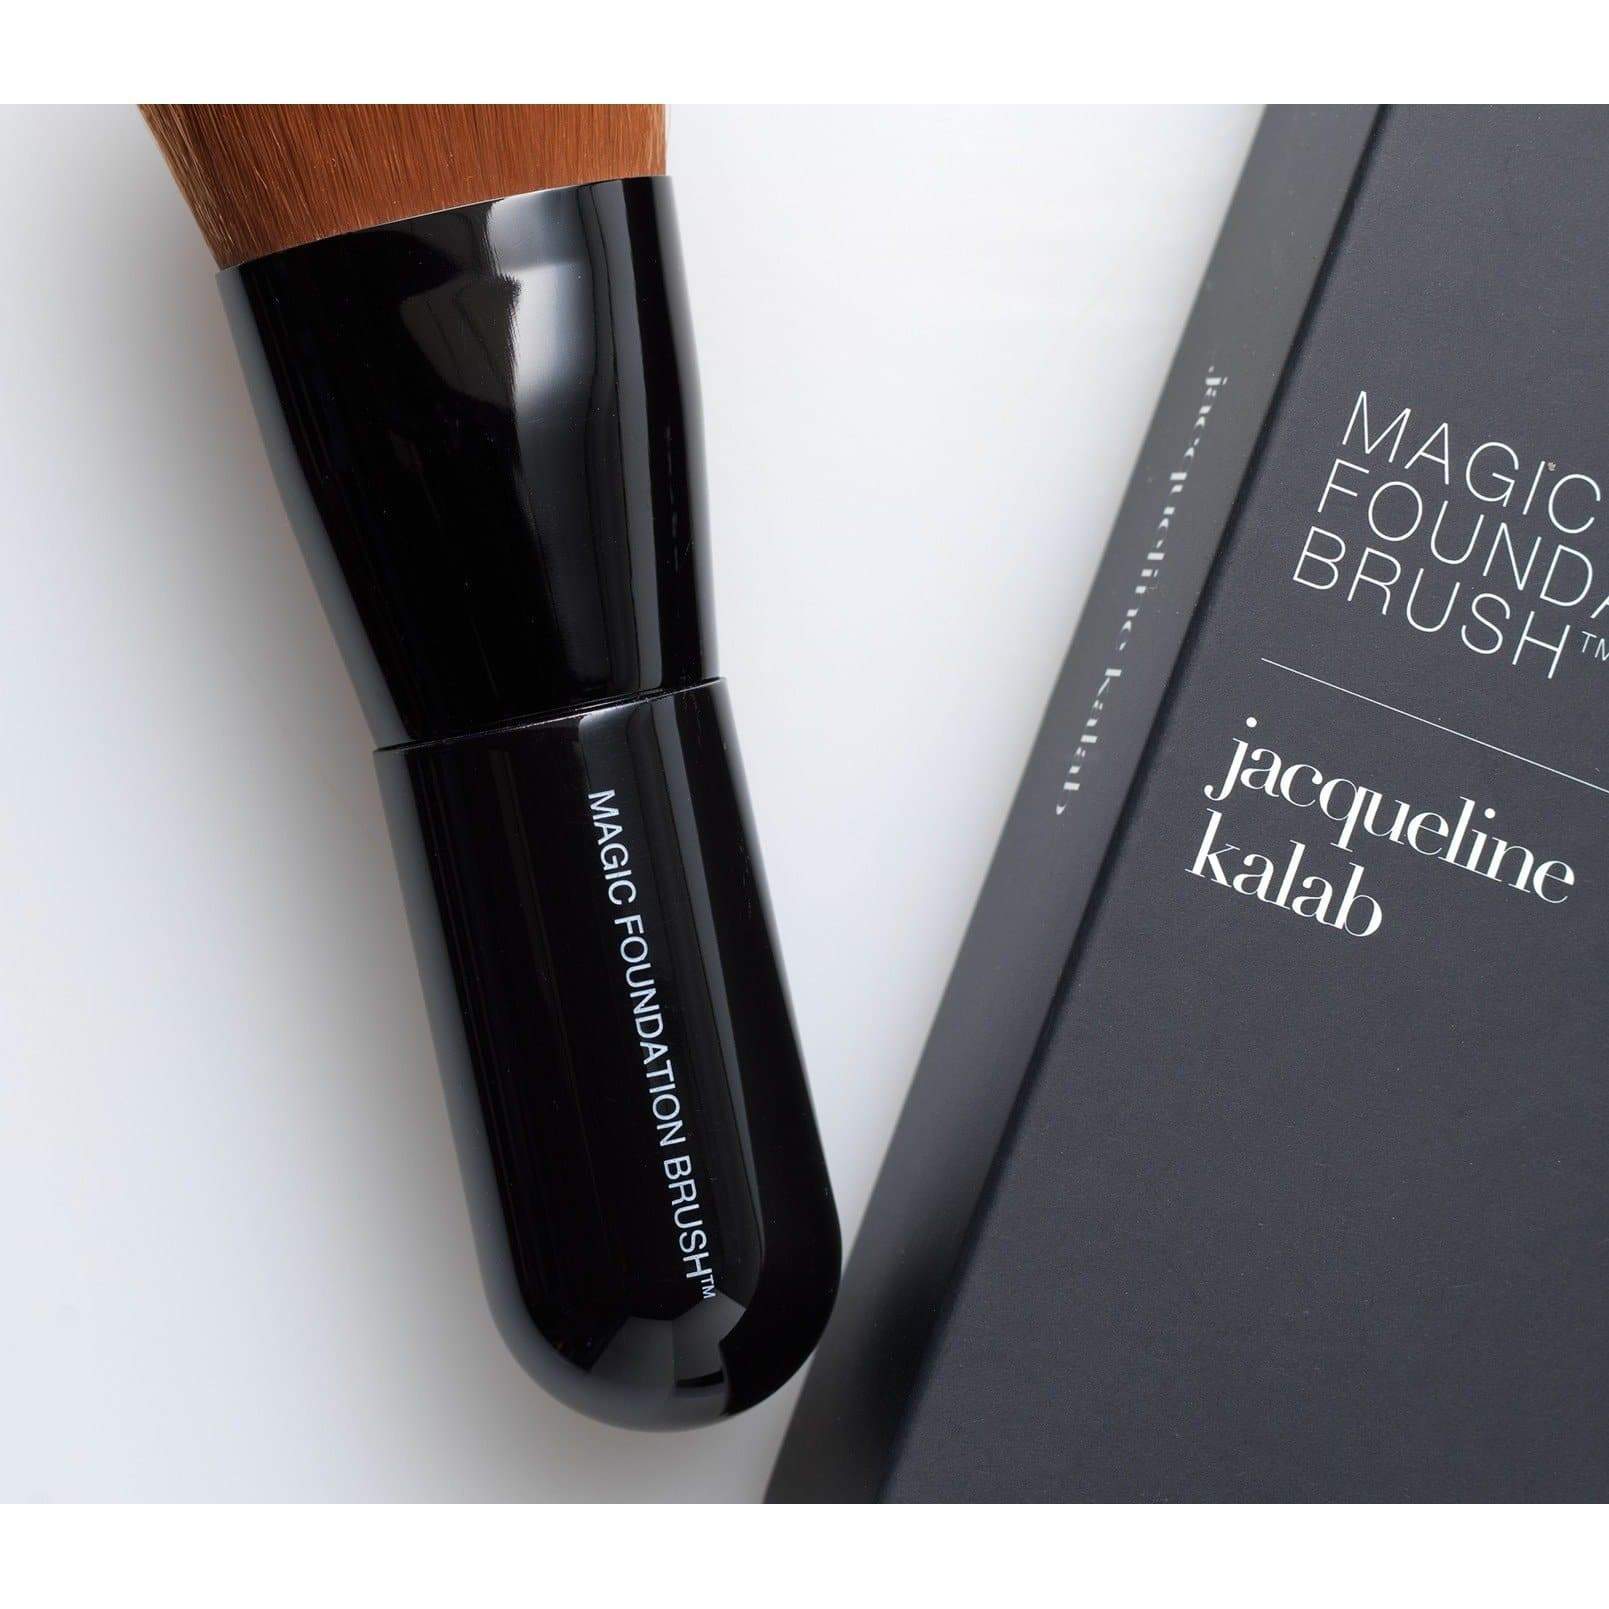 Magic Foundation Brush - The Most Addictive, Most Useful, Most Amazing,  Most Can't-Live-Without Makeup Brush on the Market, by Jacqueline Kalab